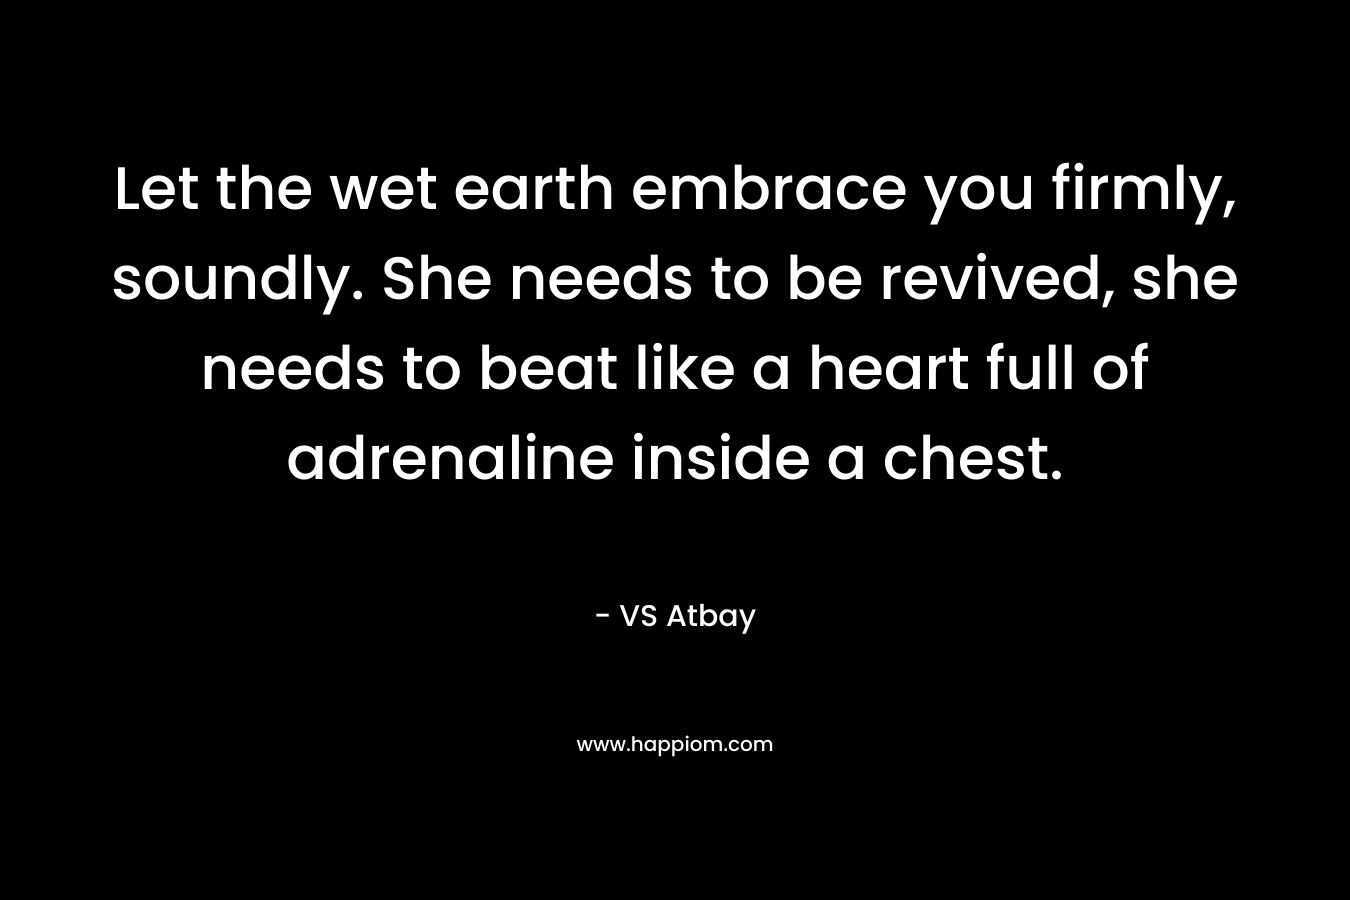 Let the wet earth embrace you firmly, soundly. She needs to be revived, she needs to beat like a heart full of adrenaline inside a chest. – VS Atbay